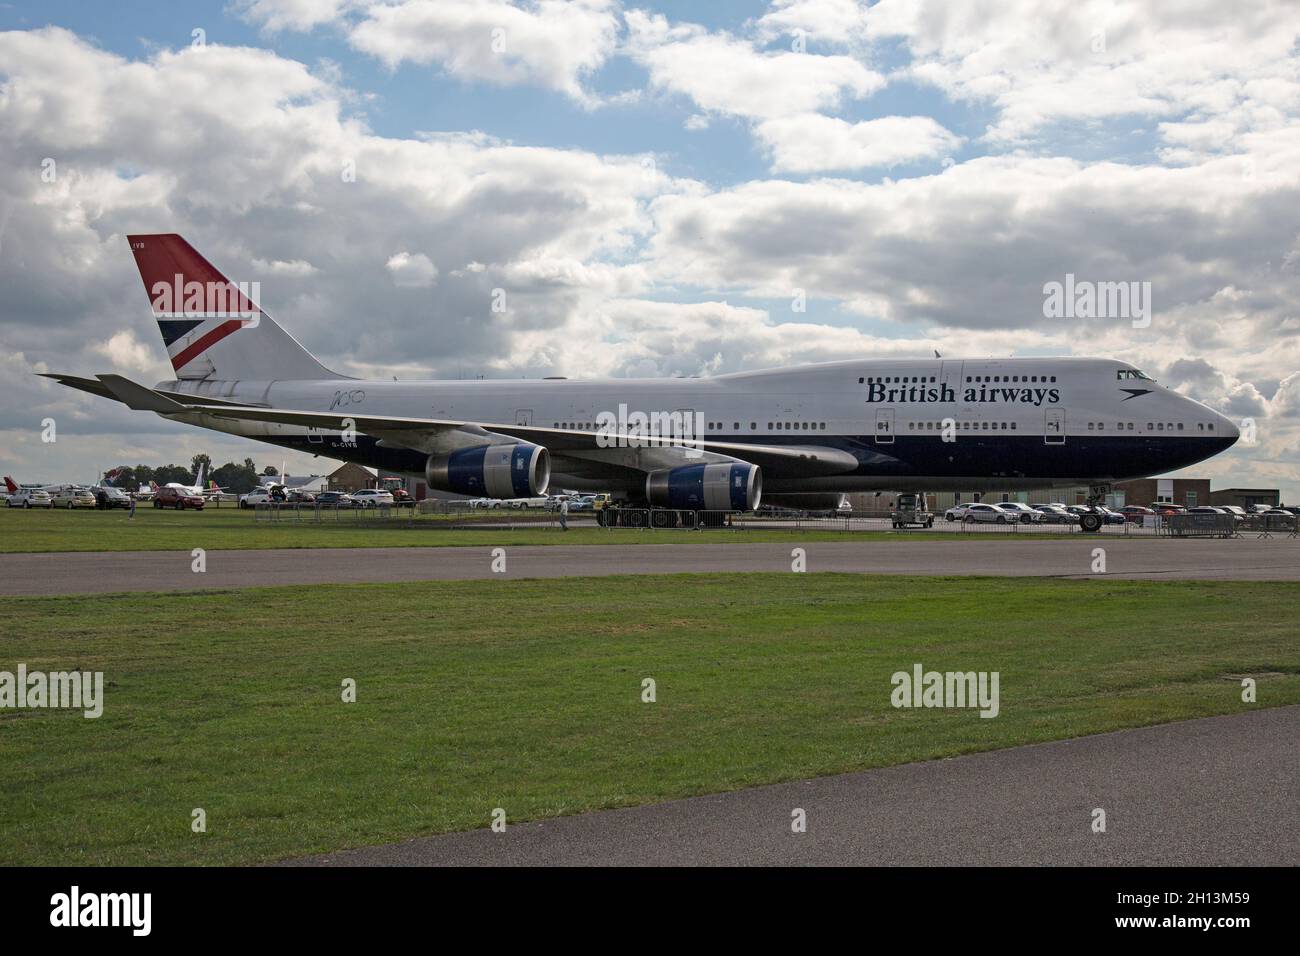 A British Airways Boeing 747-400 airliner, G-CIVB, on display and preserved at Cotswold Kemble Airport in England. Stock Photo